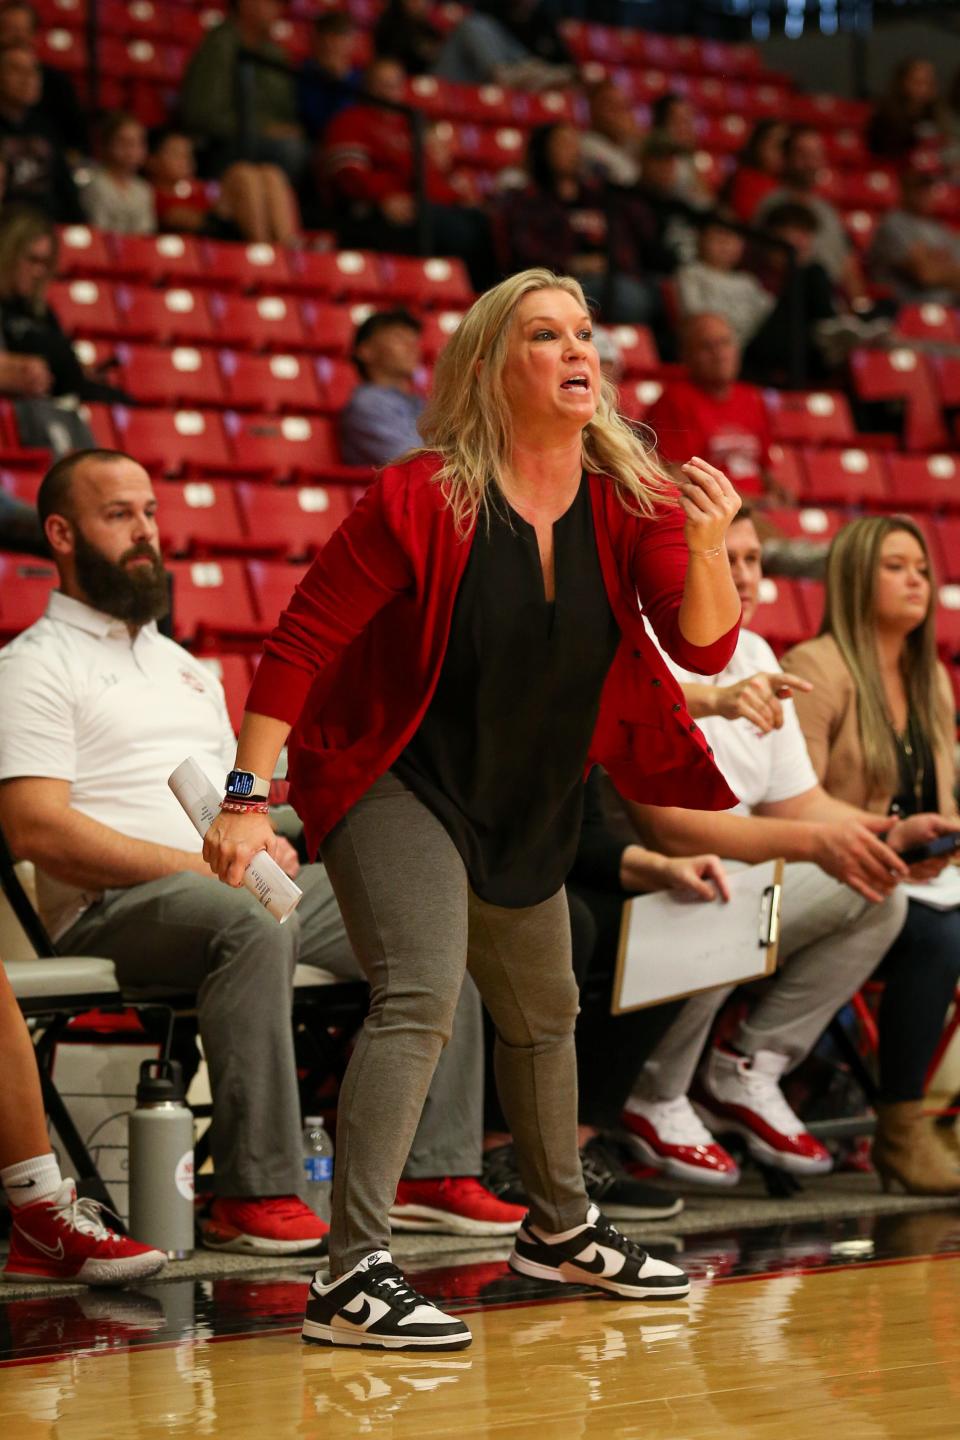 Nixa High School Lady Eagles Head Coach Jennifer Perryman encourages her players during the Pink & White Lady Basketball Classic semifinals at the O'Reilly Family Event Center on Thursday, Dec. 29, 2022.